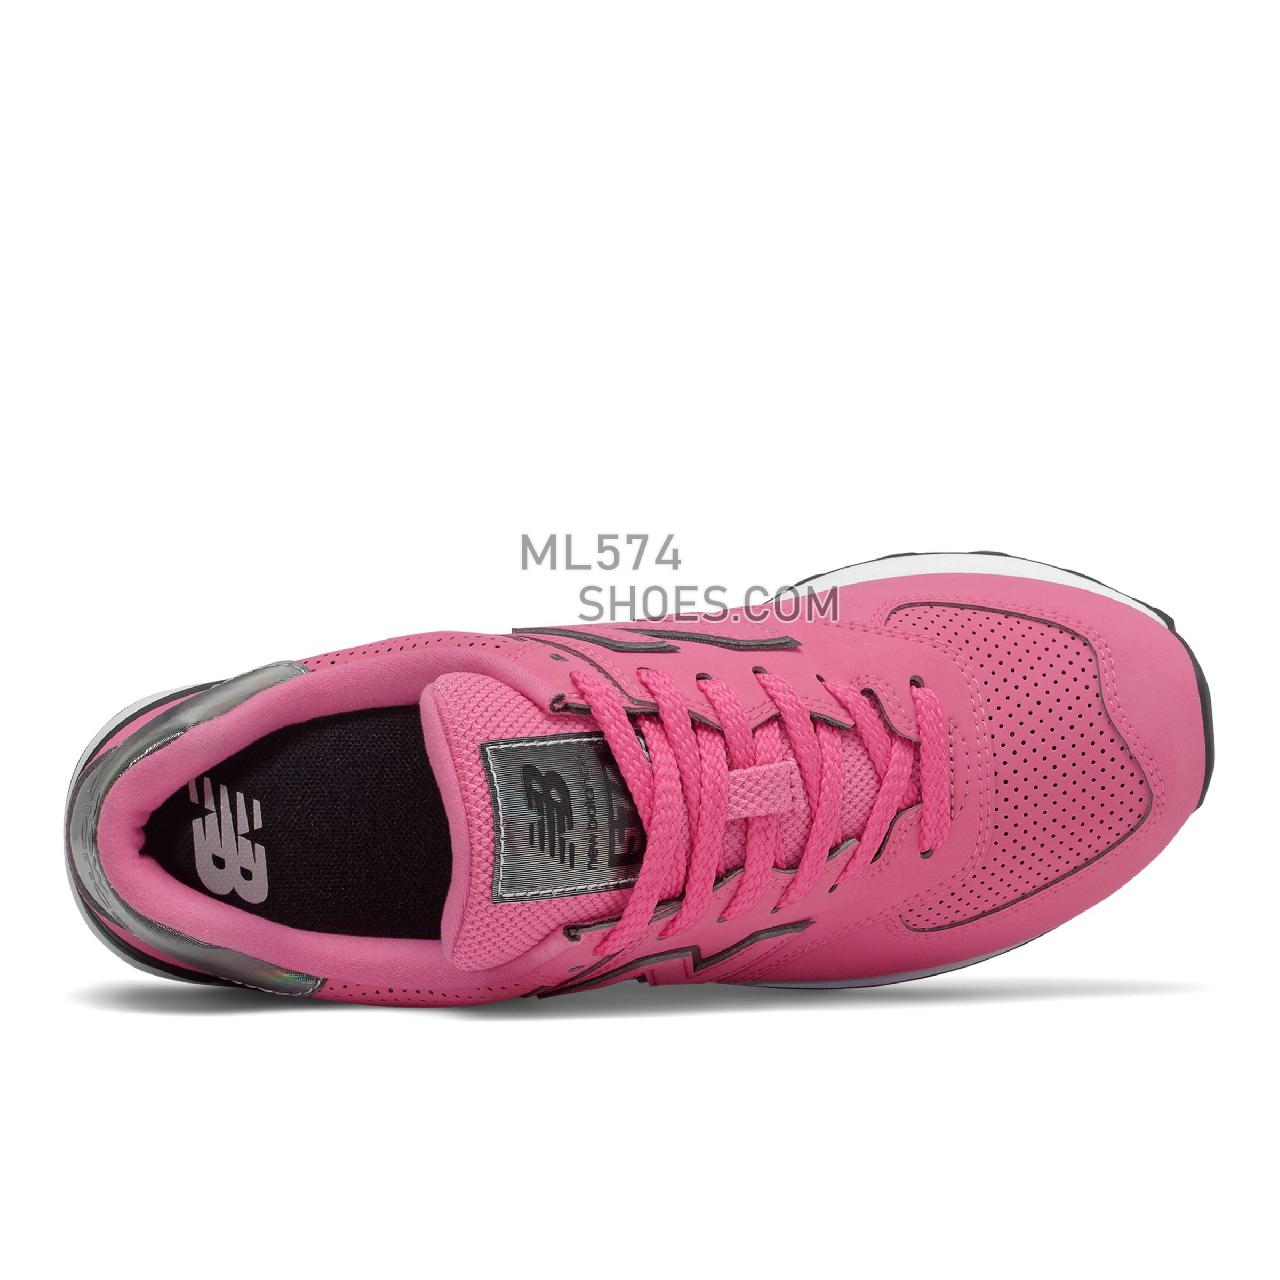 New Balance 574 - Women's Classic Sneakers - Sporty Pink with Black - WL574DT2